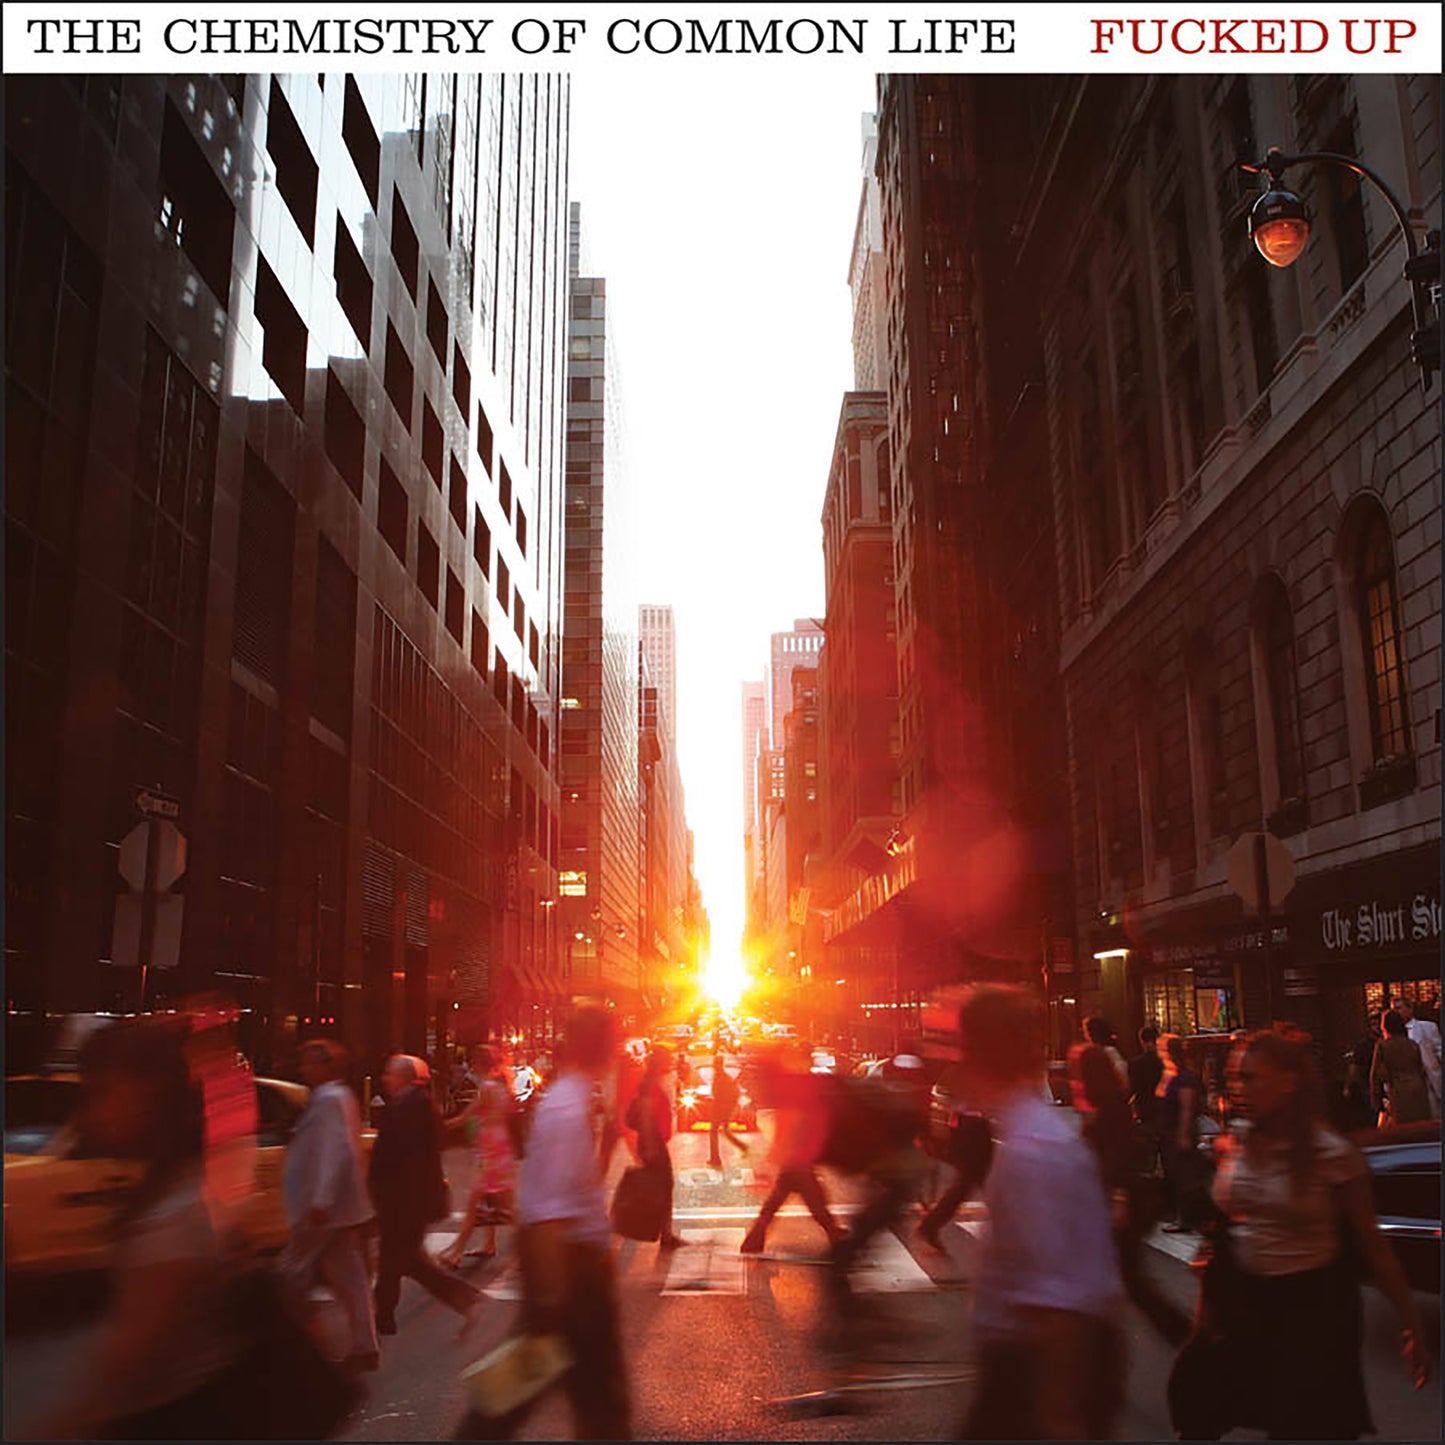 Fucked Up 'The Chemistry Of Common Life' 2xLP